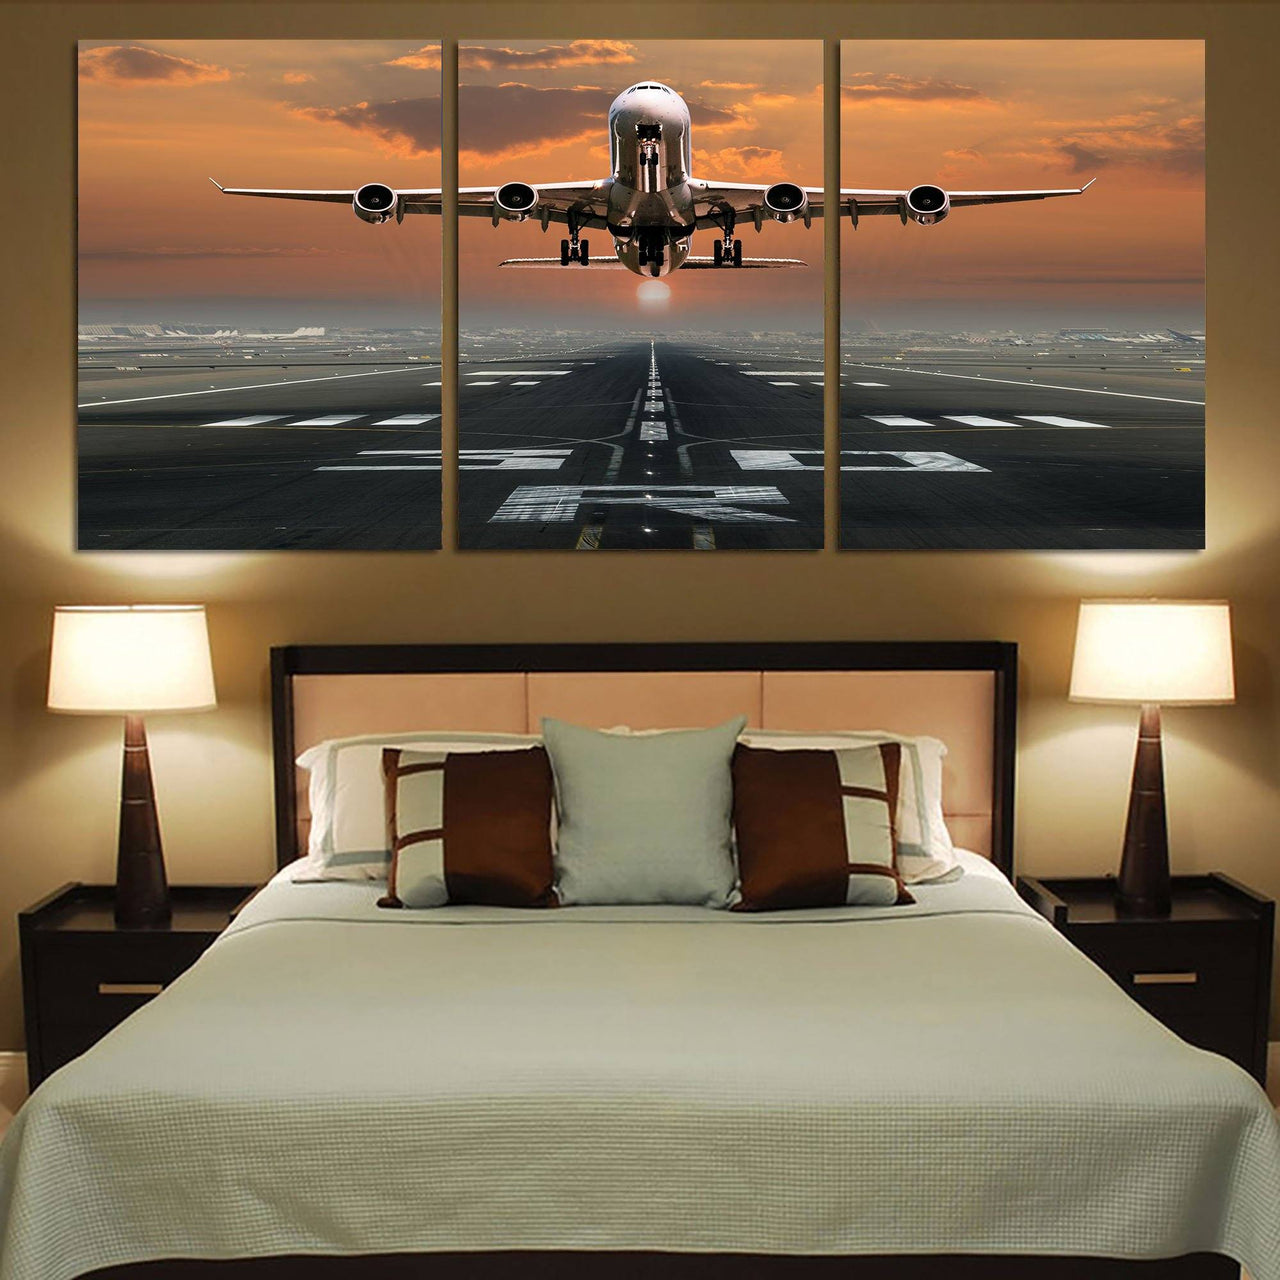 Aircraft Departing from RW30 Printed Canvas Posters (3 Pieces) Aviation Shop 